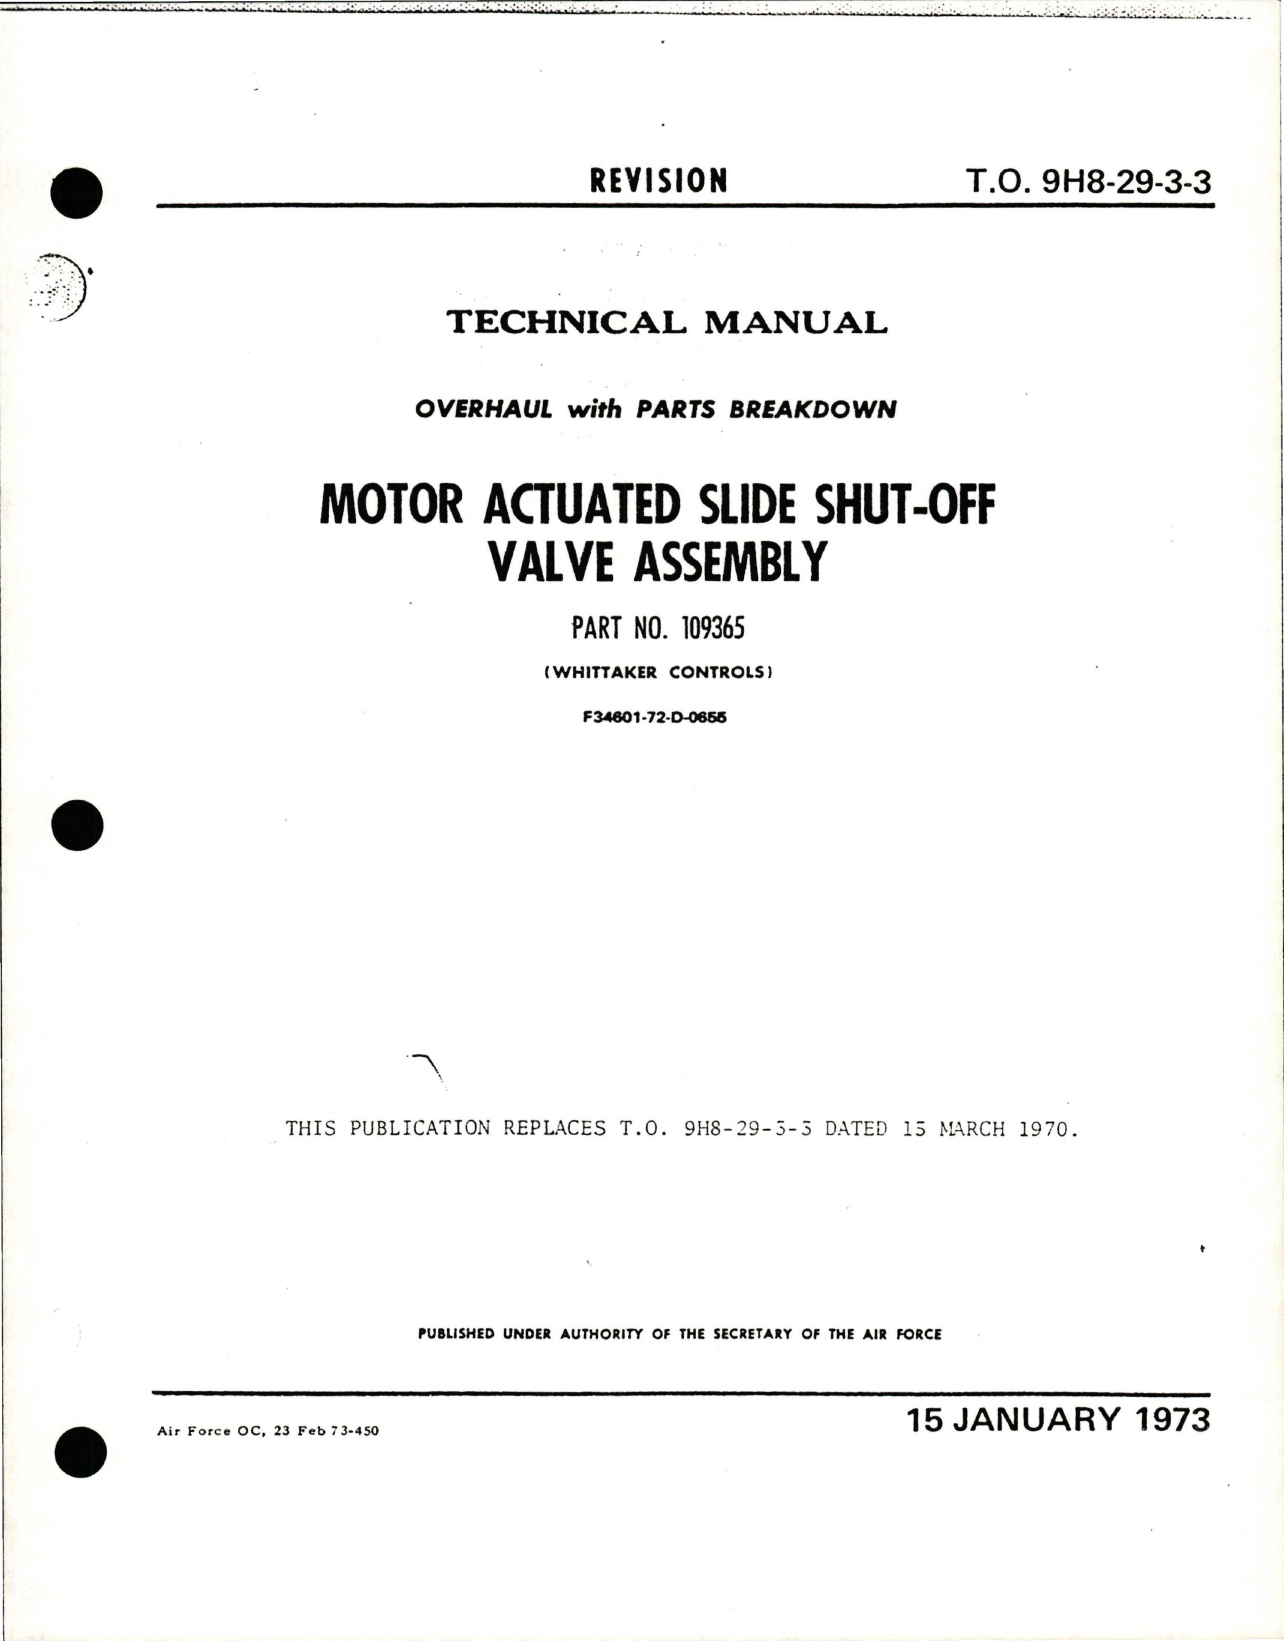 Sample page 1 from AirCorps Library document: Overhaul with Parts Breakdown for Motor Actuated Slide Shut-Off Valve Assembly - Part 109365